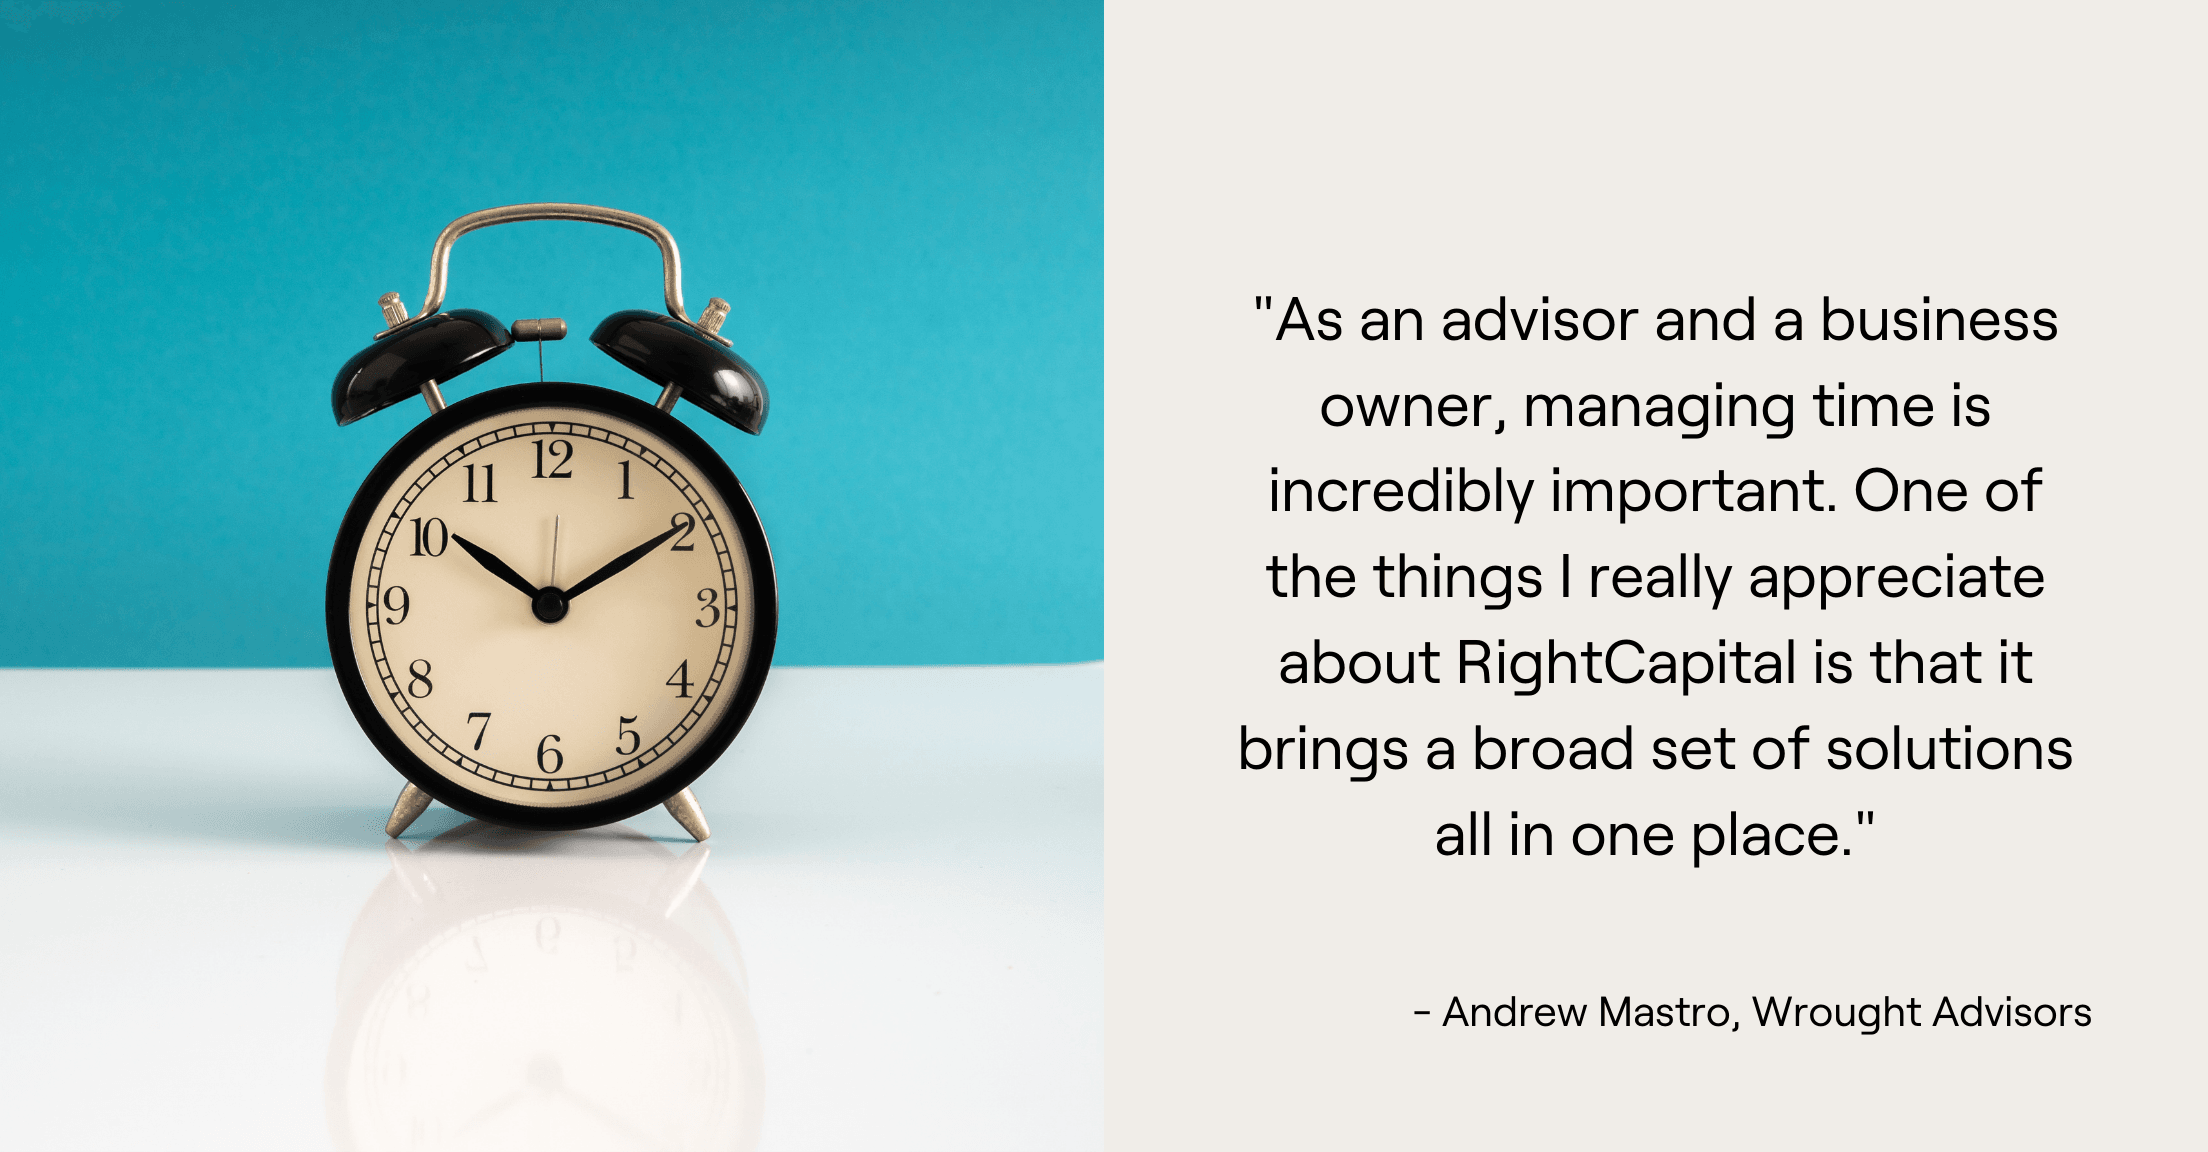 Clock and advisor Andrew Mastro quote: "As an advisor and a business owner, managing time is incredibly important. One of the things I really appreciate about RightCapital is that it brings a broad set of solutions all in one place."